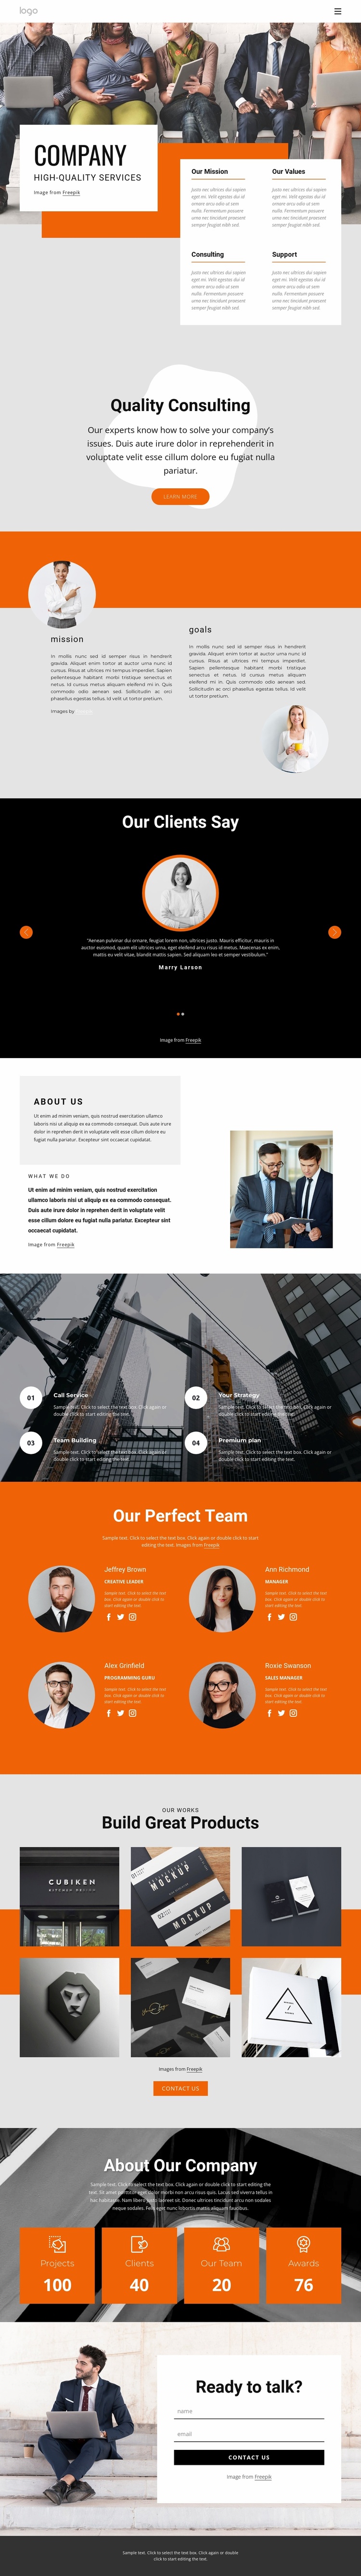 Hight quality consulting firm Landing Page